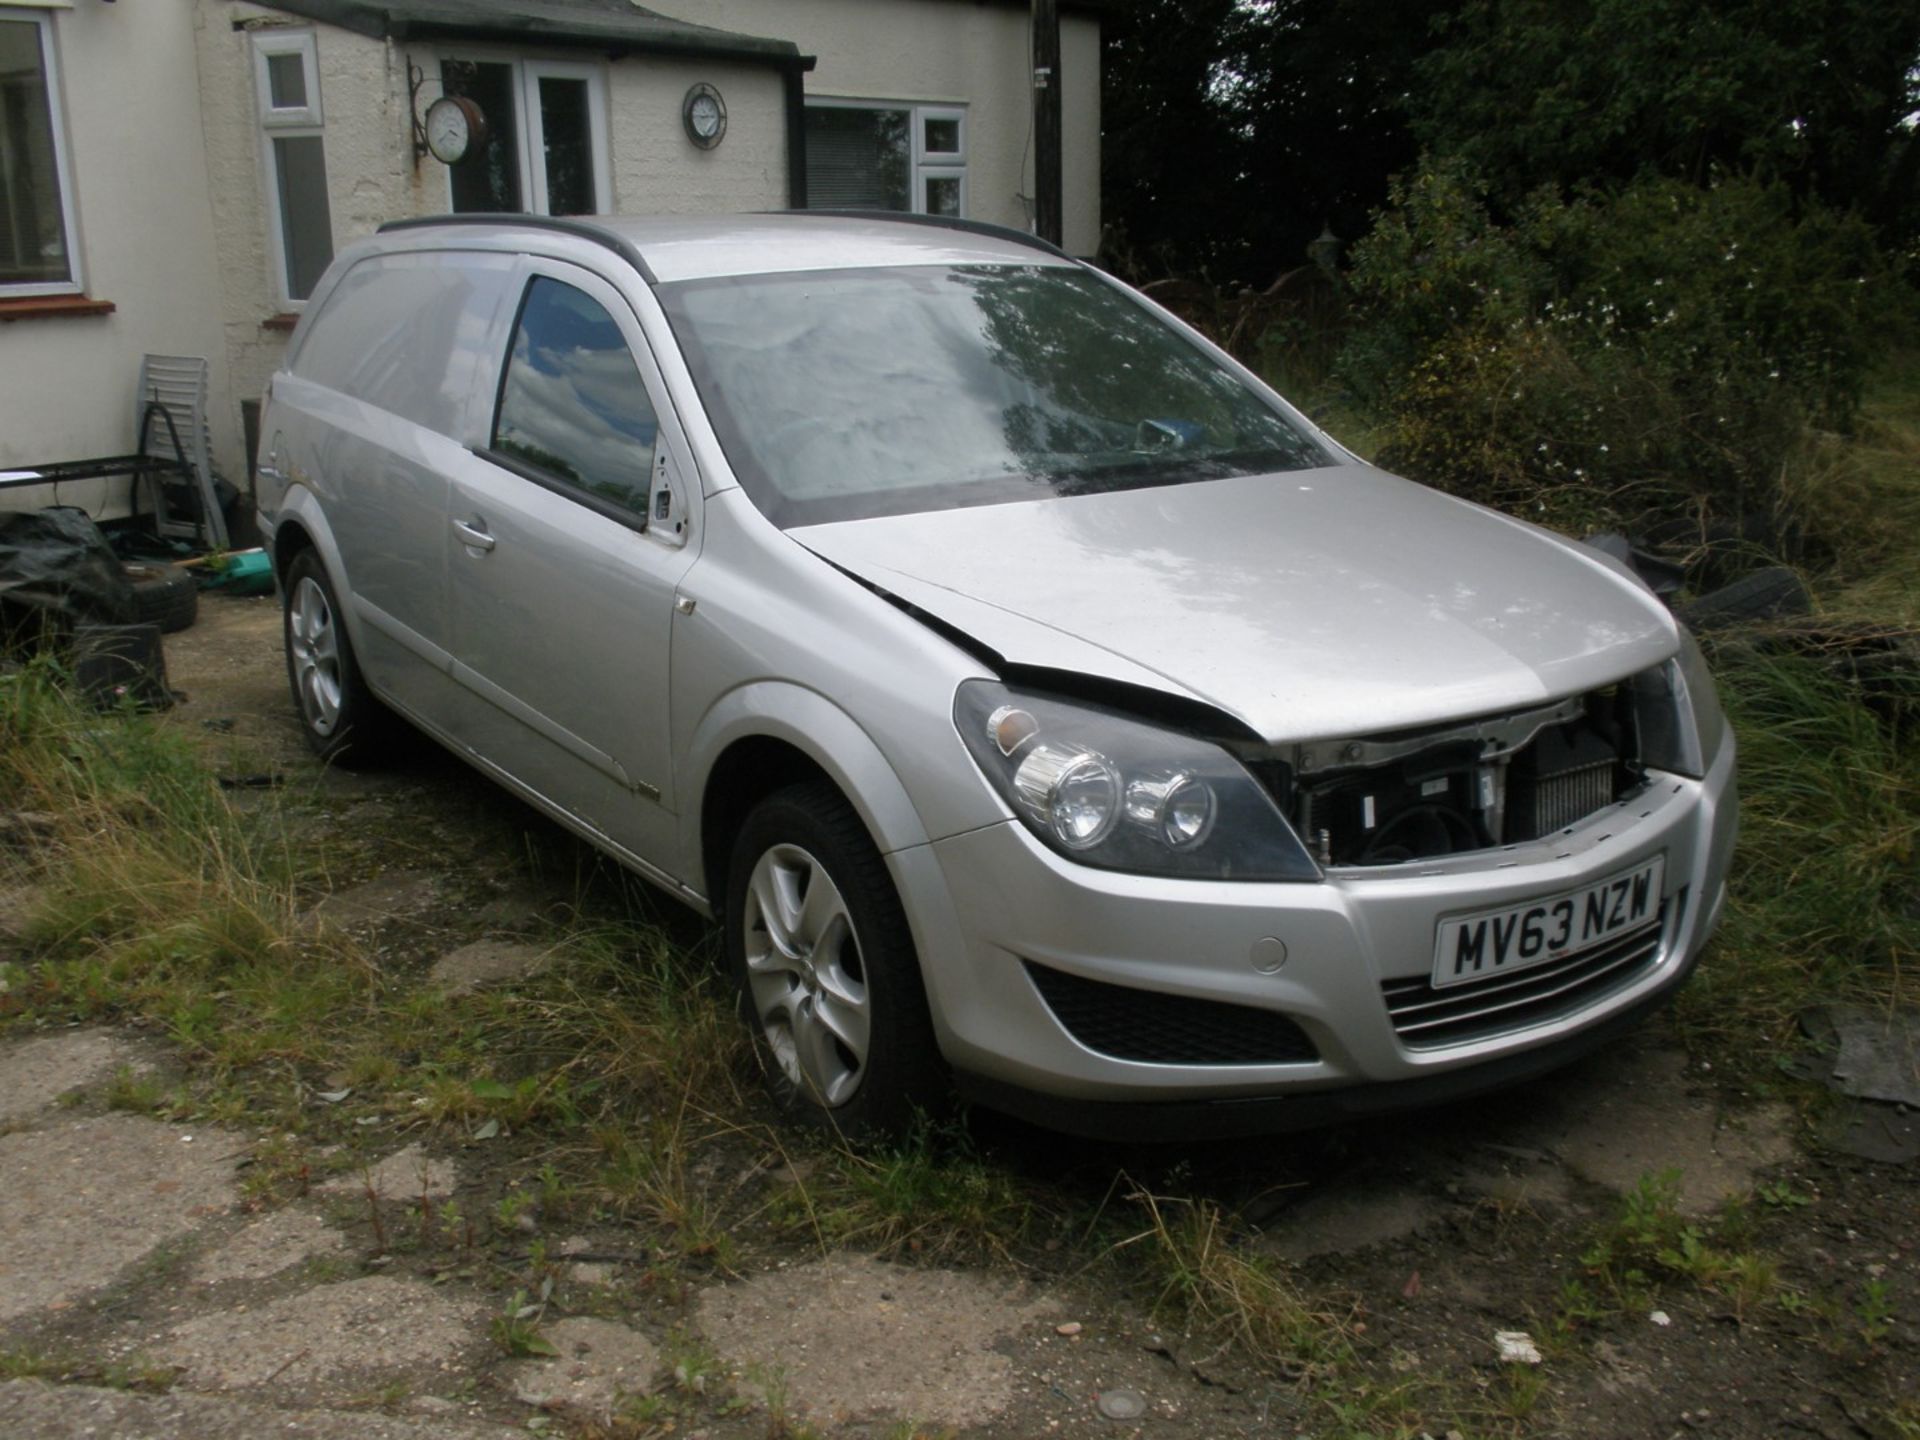 A Vauxhall Astra Sportive van 1.7 CDTI, registration MV63 NZW. The head has been removed from the e